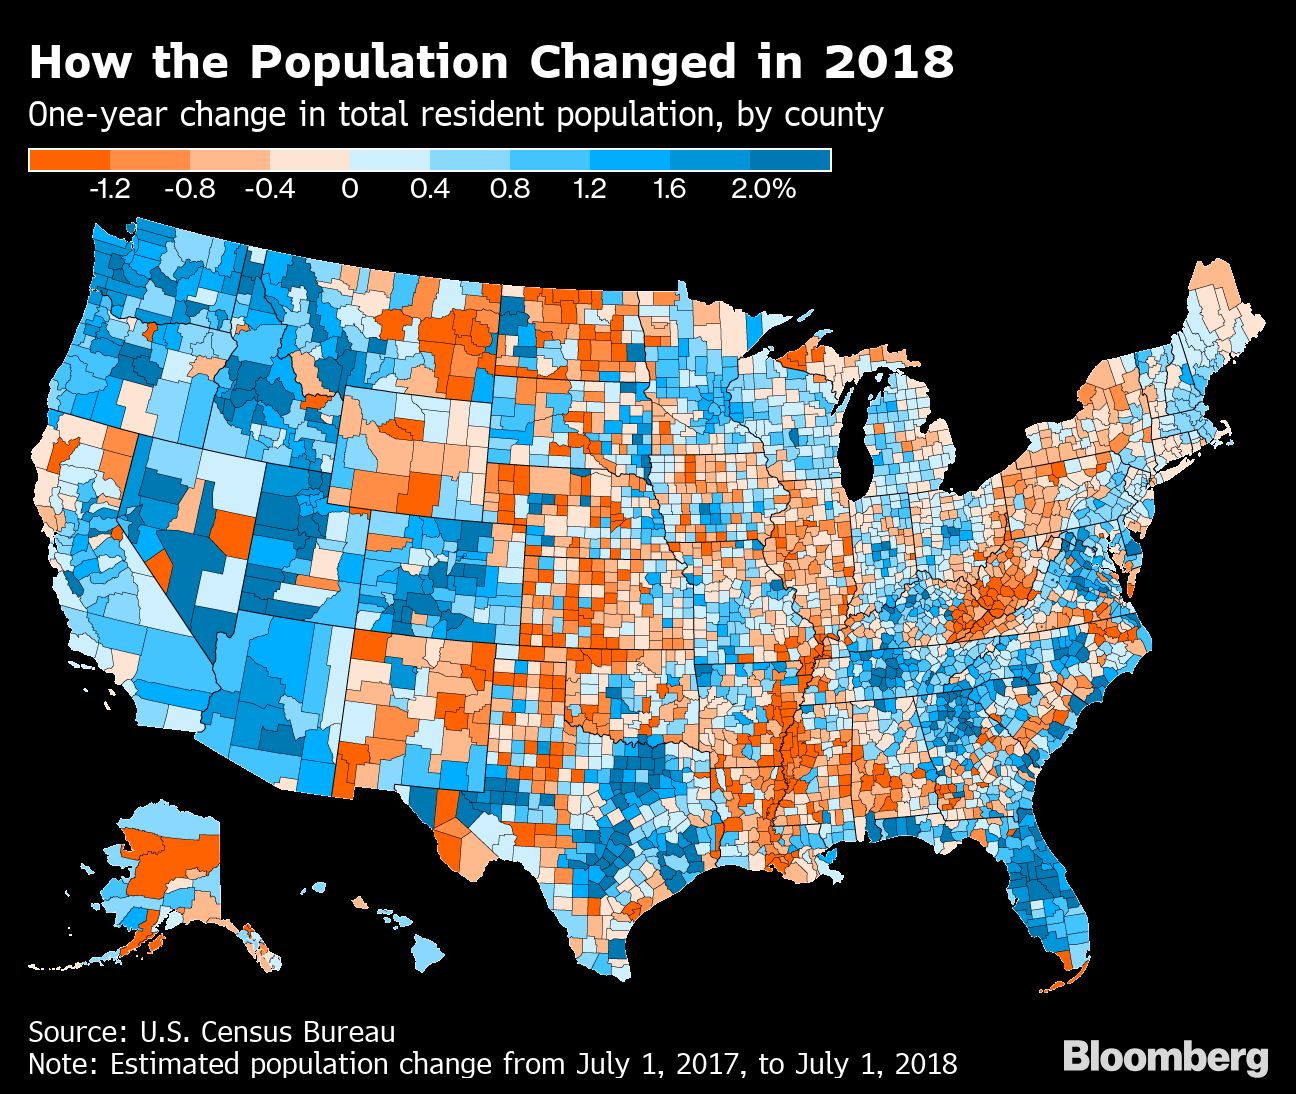 How the Population Changed in 2018